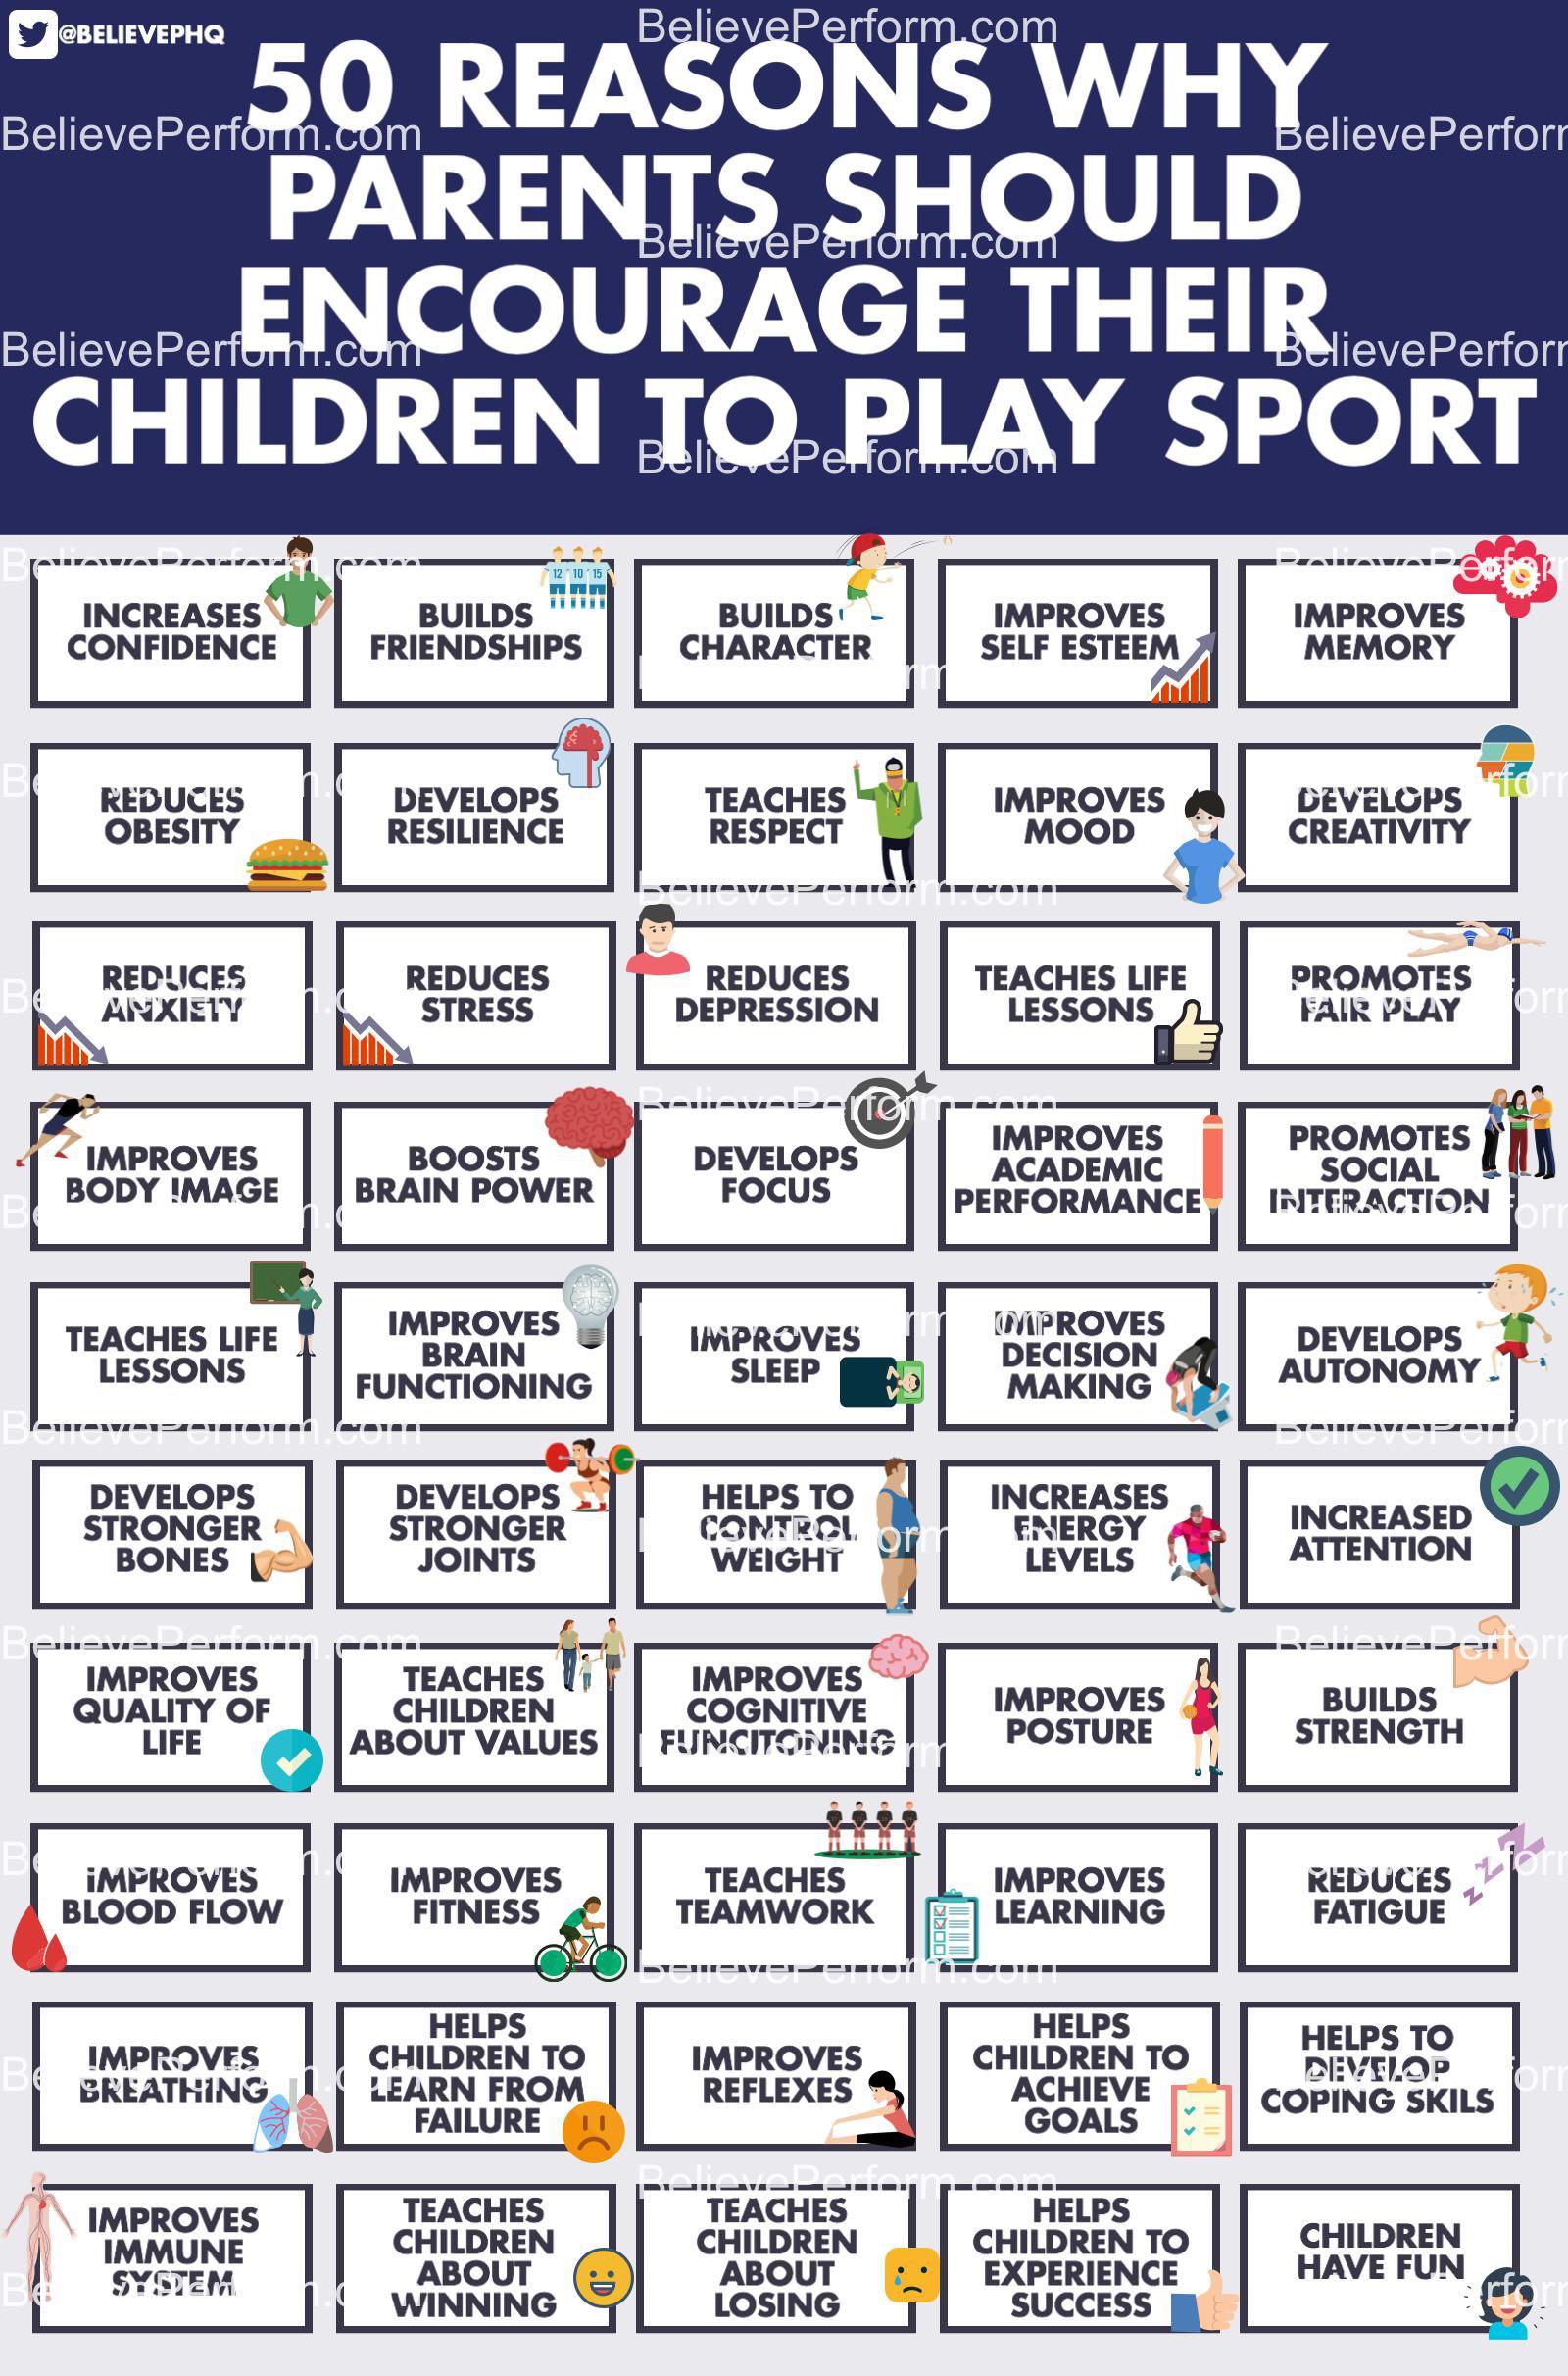 50 reasons why parents should encourage their children to play sport -  BelievePerform - The UK's leading Sports Psychology Website